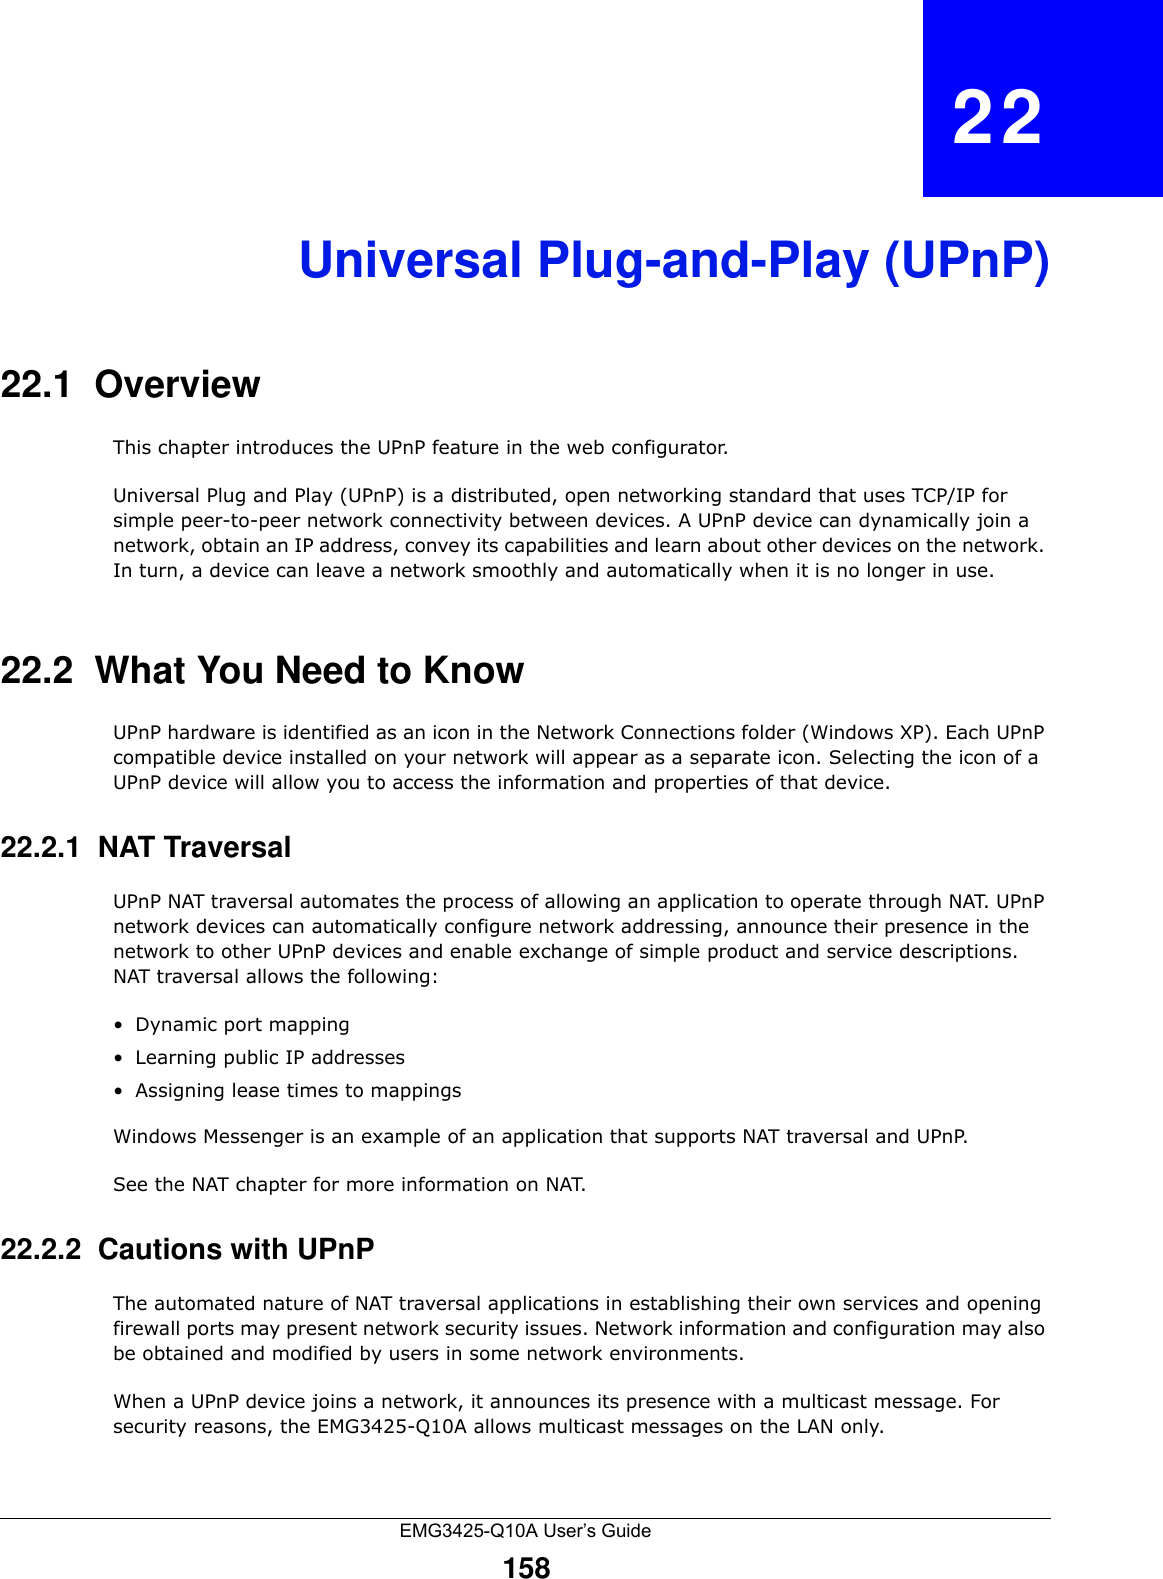 EMG3425-Q10A User’s Guide158CHAPTER   22Universal Plug-and-Play (UPnP)22.1  Overview This chapter introduces the UPnP feature in the web configurator.Universal Plug and Play (UPnP) is a distributed, open networking standard that uses TCP/IP for simple peer-to-peer network connectivity between devices. A UPnP device can dynamically join a network, obtain an IP address, convey its capabilities and learn about other devices on the network. In turn, a device can leave a network smoothly and automatically when it is no longer in use.22.2  What You Need to KnowUPnP hardware is identified as an icon in the Network Connections folder (Windows XP). Each UPnP compatible device installed on your network will appear as a separate icon. Selecting the icon of a UPnP device will allow you to access the information and properties of that device. 22.2.1  NAT TraversalUPnP NAT traversal automates the process of allowing an application to operate through NAT. UPnP network devices can automatically configure network addressing, announce their presence in the network to other UPnP devices and enable exchange of simple product and service descriptions. NAT traversal allows the following:• Dynamic port mapping• Learning public IP addresses• Assigning lease times to mappingsWindows Messenger is an example of an application that supports NAT traversal and UPnP. See the NAT chapter for more information on NAT.22.2.2  Cautions with UPnPThe automated nature of NAT traversal applications in establishing their own services and opening firewall ports may present network security issues. Network information and configuration may also be obtained and modified by users in some network environments. When a UPnP device joins a network, it announces its presence with a multicast message. For security reasons, the EMG3425-Q10A allows multicast messages on the LAN only.